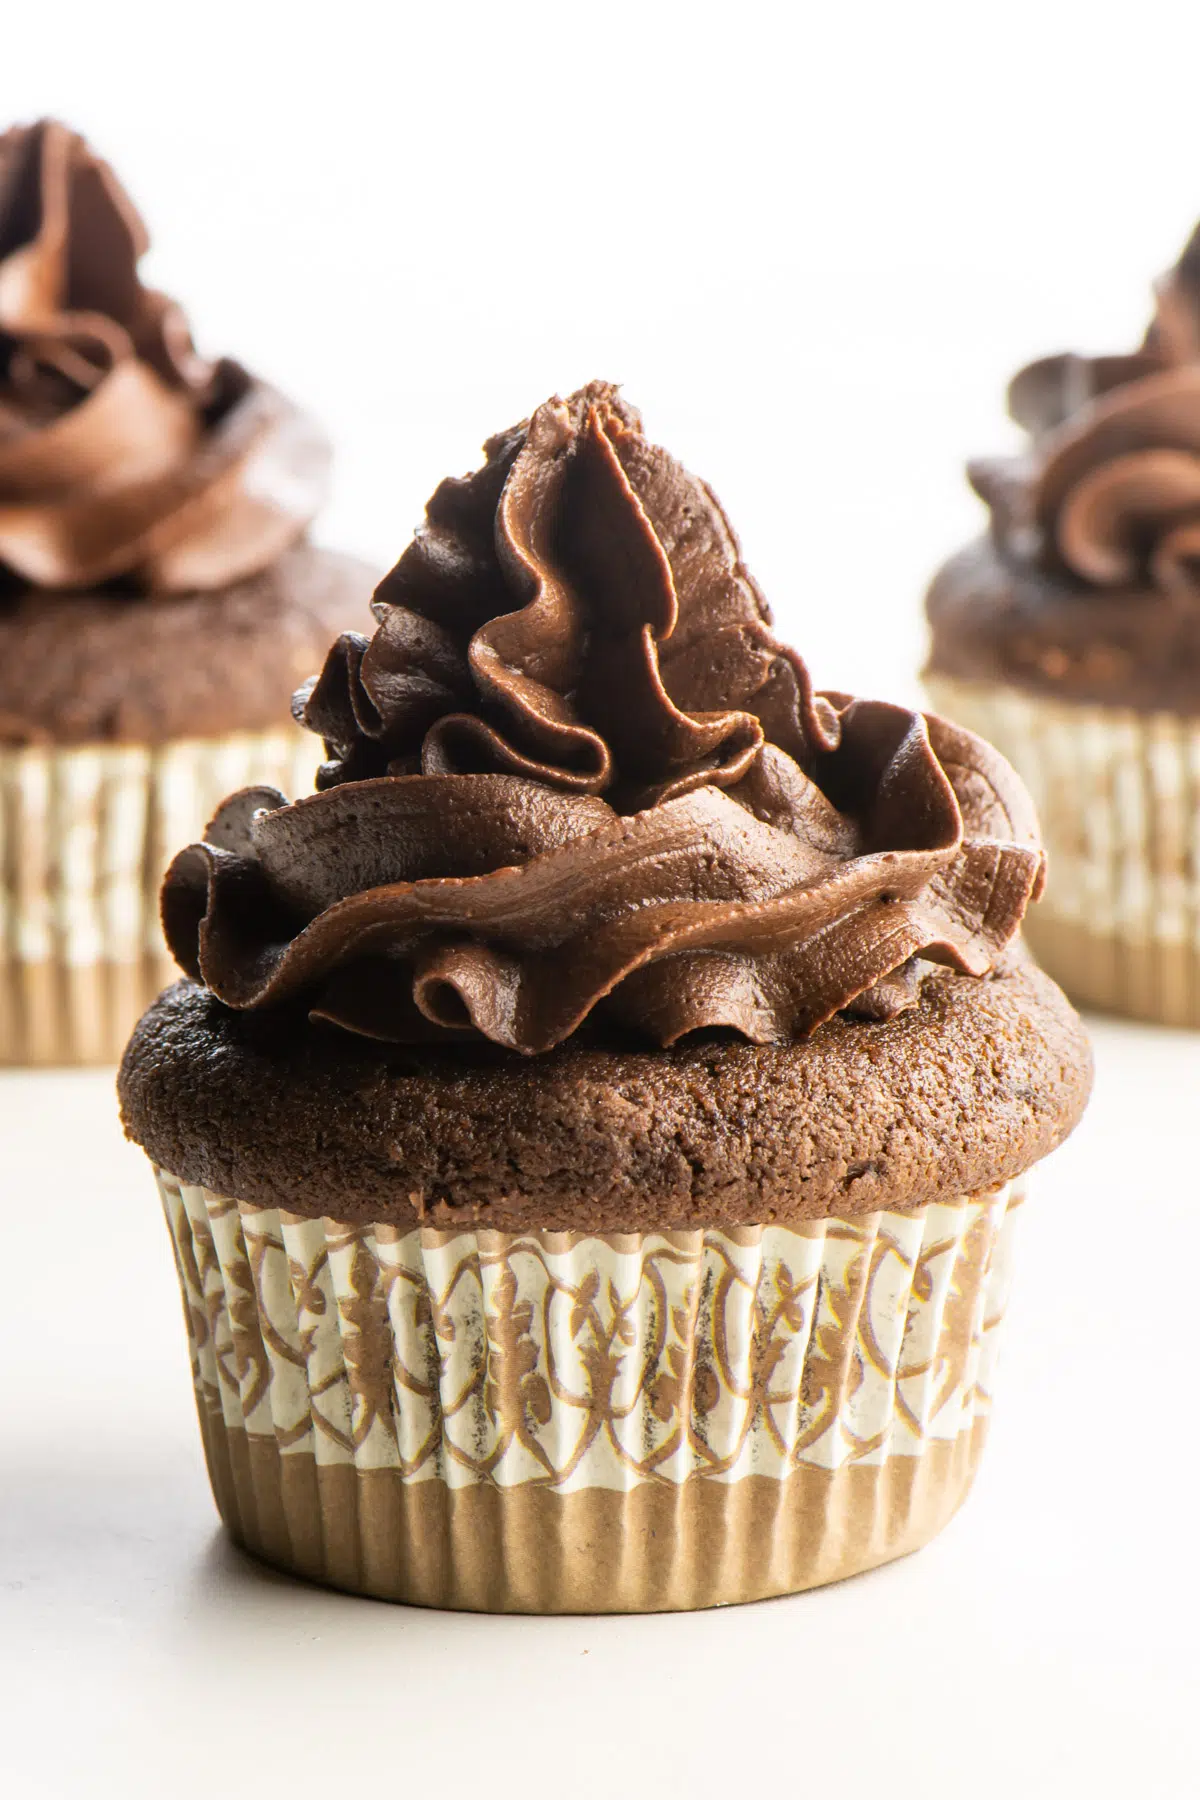 A cupcake with chocolate frosting sits in front of two other cupcakes.